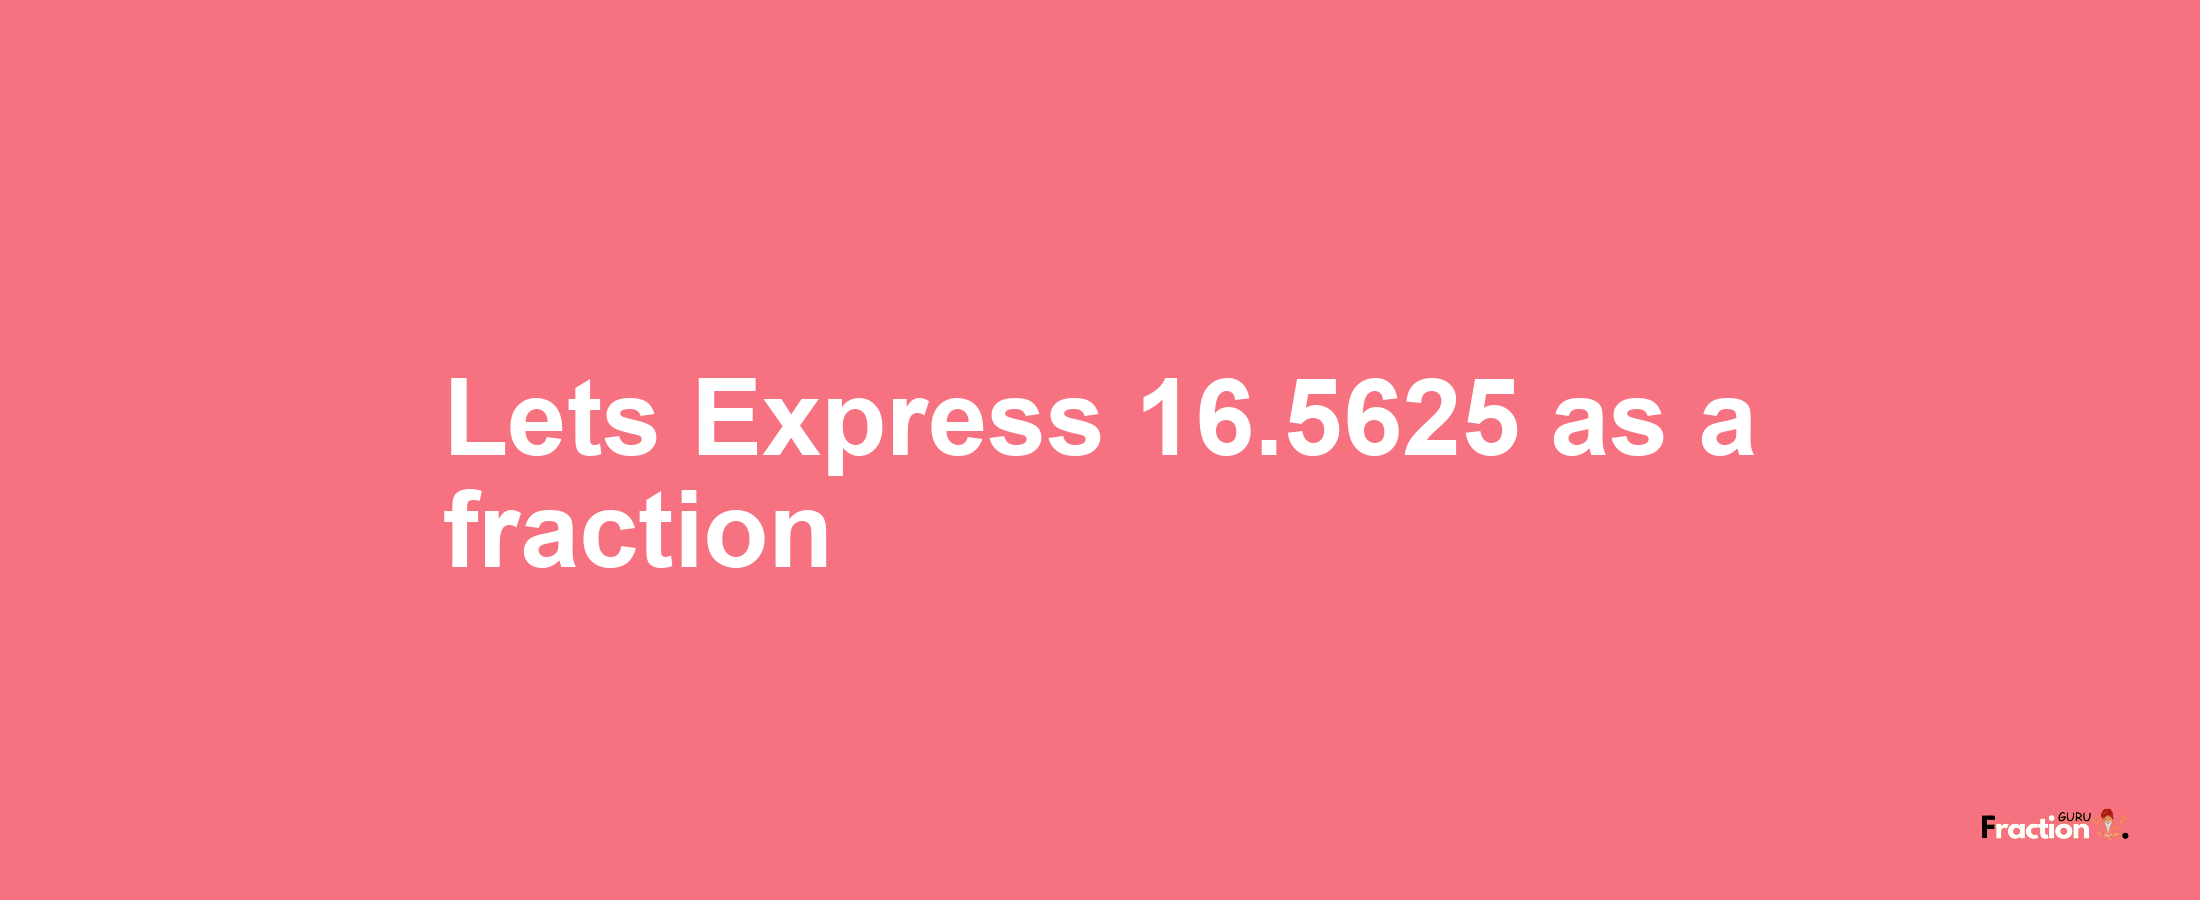 Lets Express 16.5625 as afraction